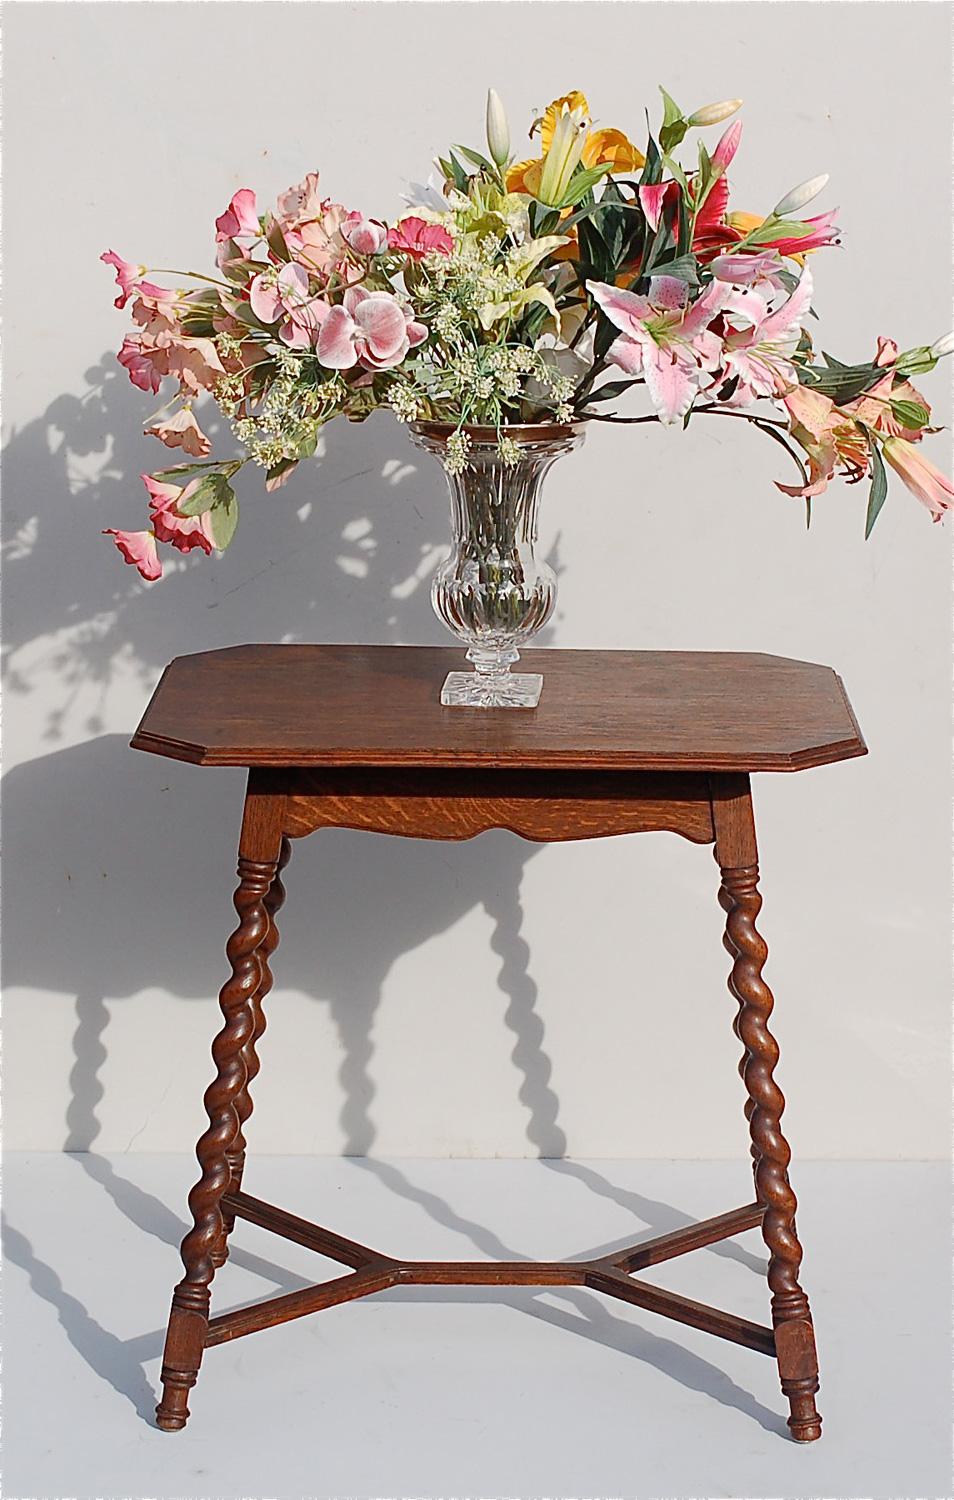 Rustic, country style side table or occasional table on an A-line base. The top is a rectangular shape with angled corners, like a stretched out octagonal shape. The barley twist legs are joined by stretchers for added strength. The legs terminate